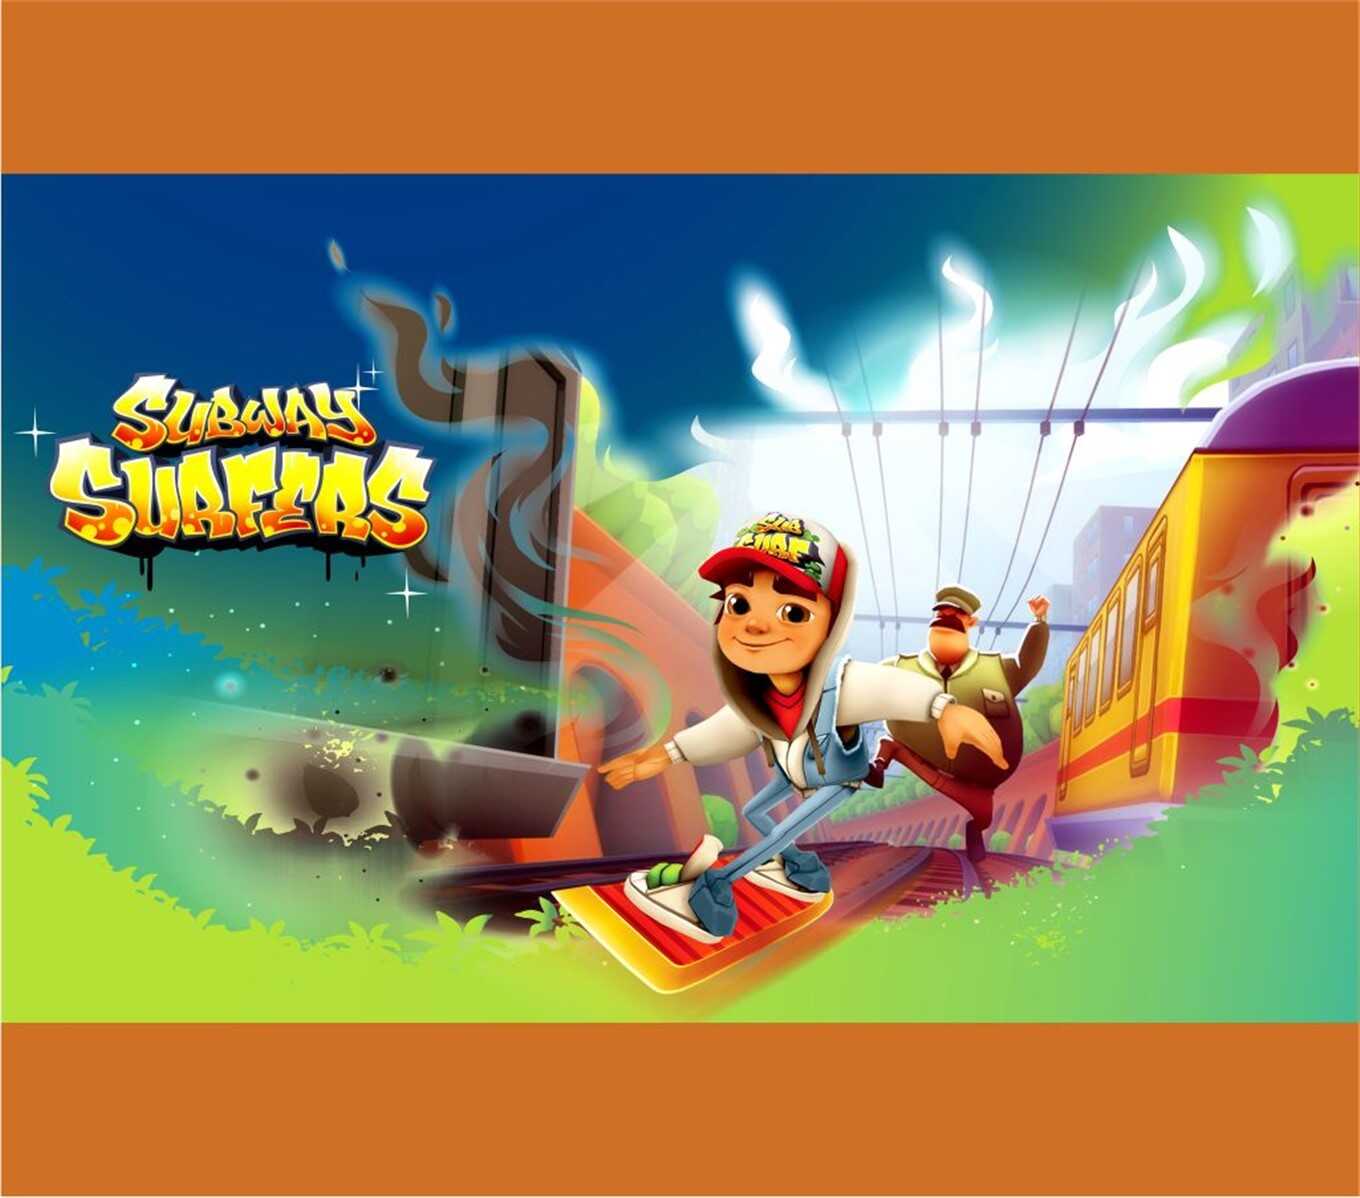 Pin by Prabhamayee Una on Subway Surfers Editions  Subway surfers, Subway  surfers game, Subway surfers download